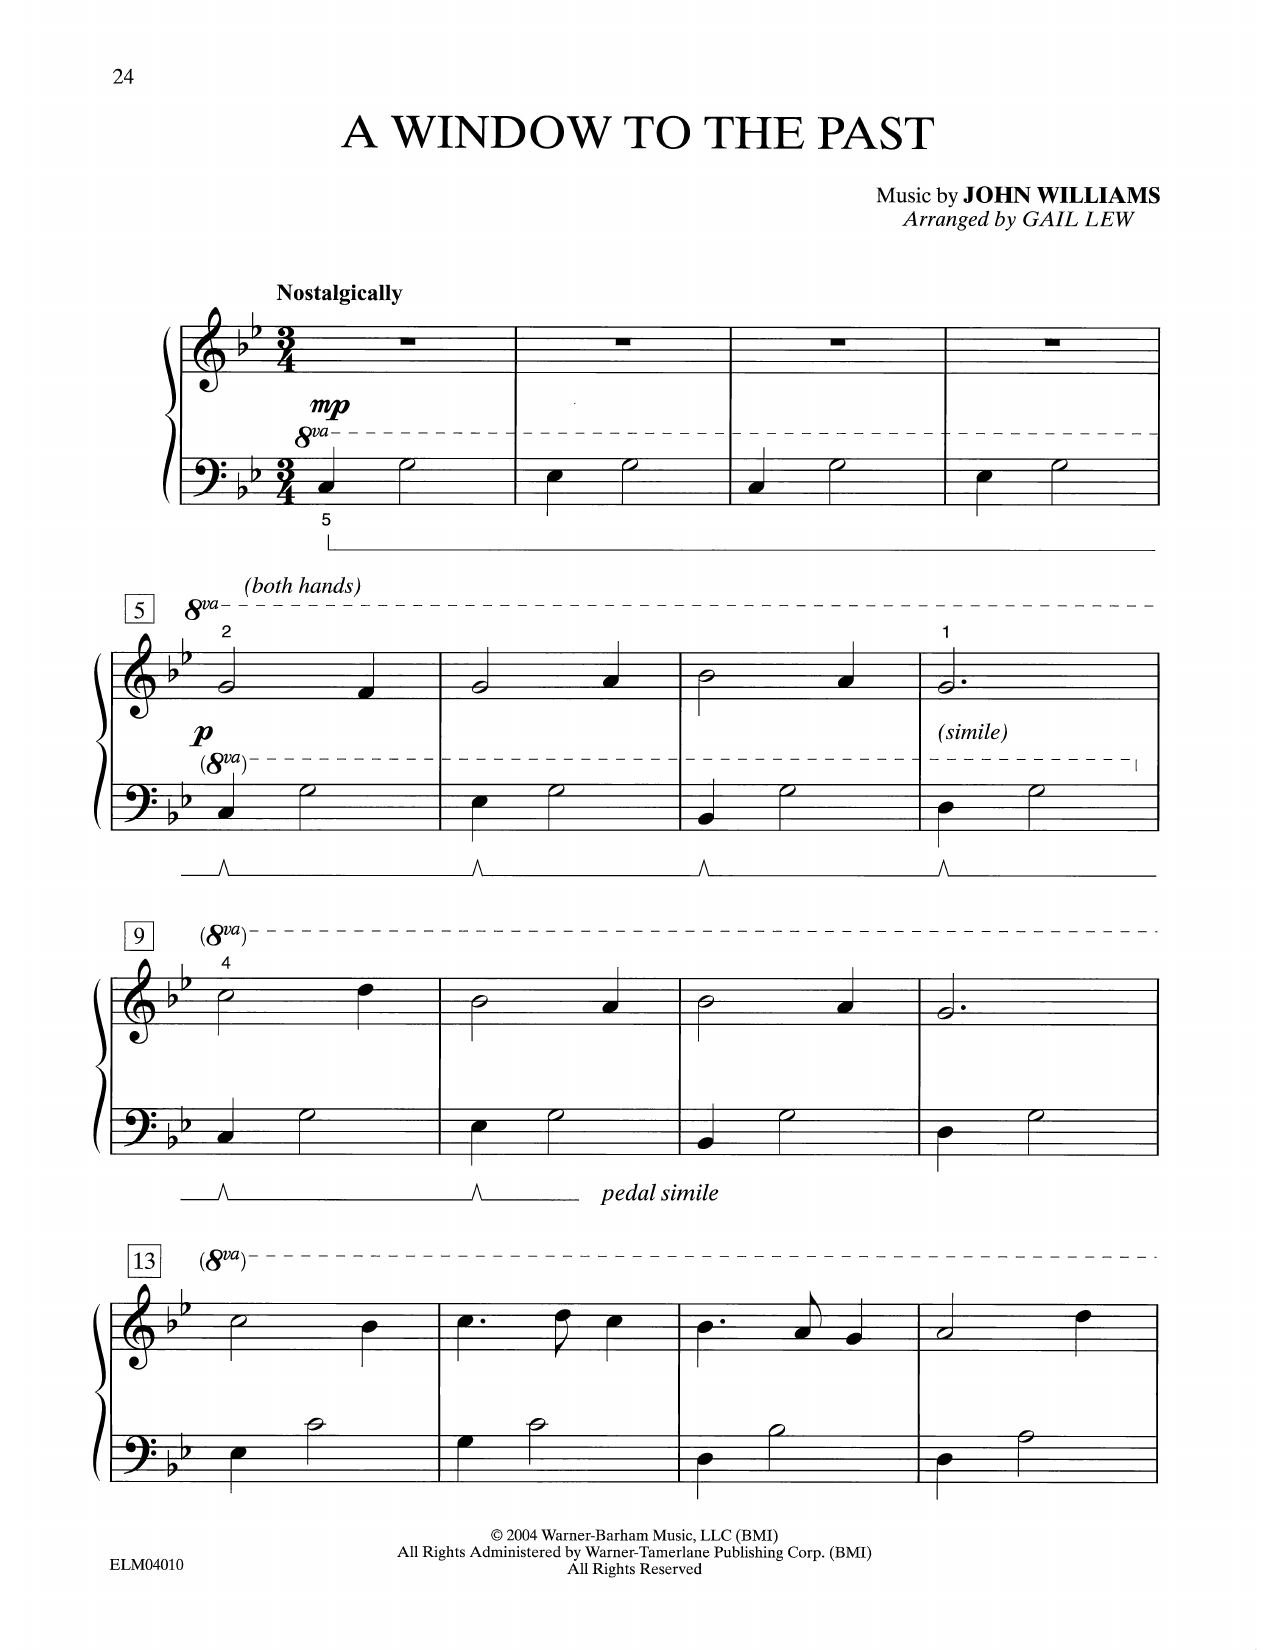 Download John Williams A Window To The Past (from Harry Potter Sheet Music